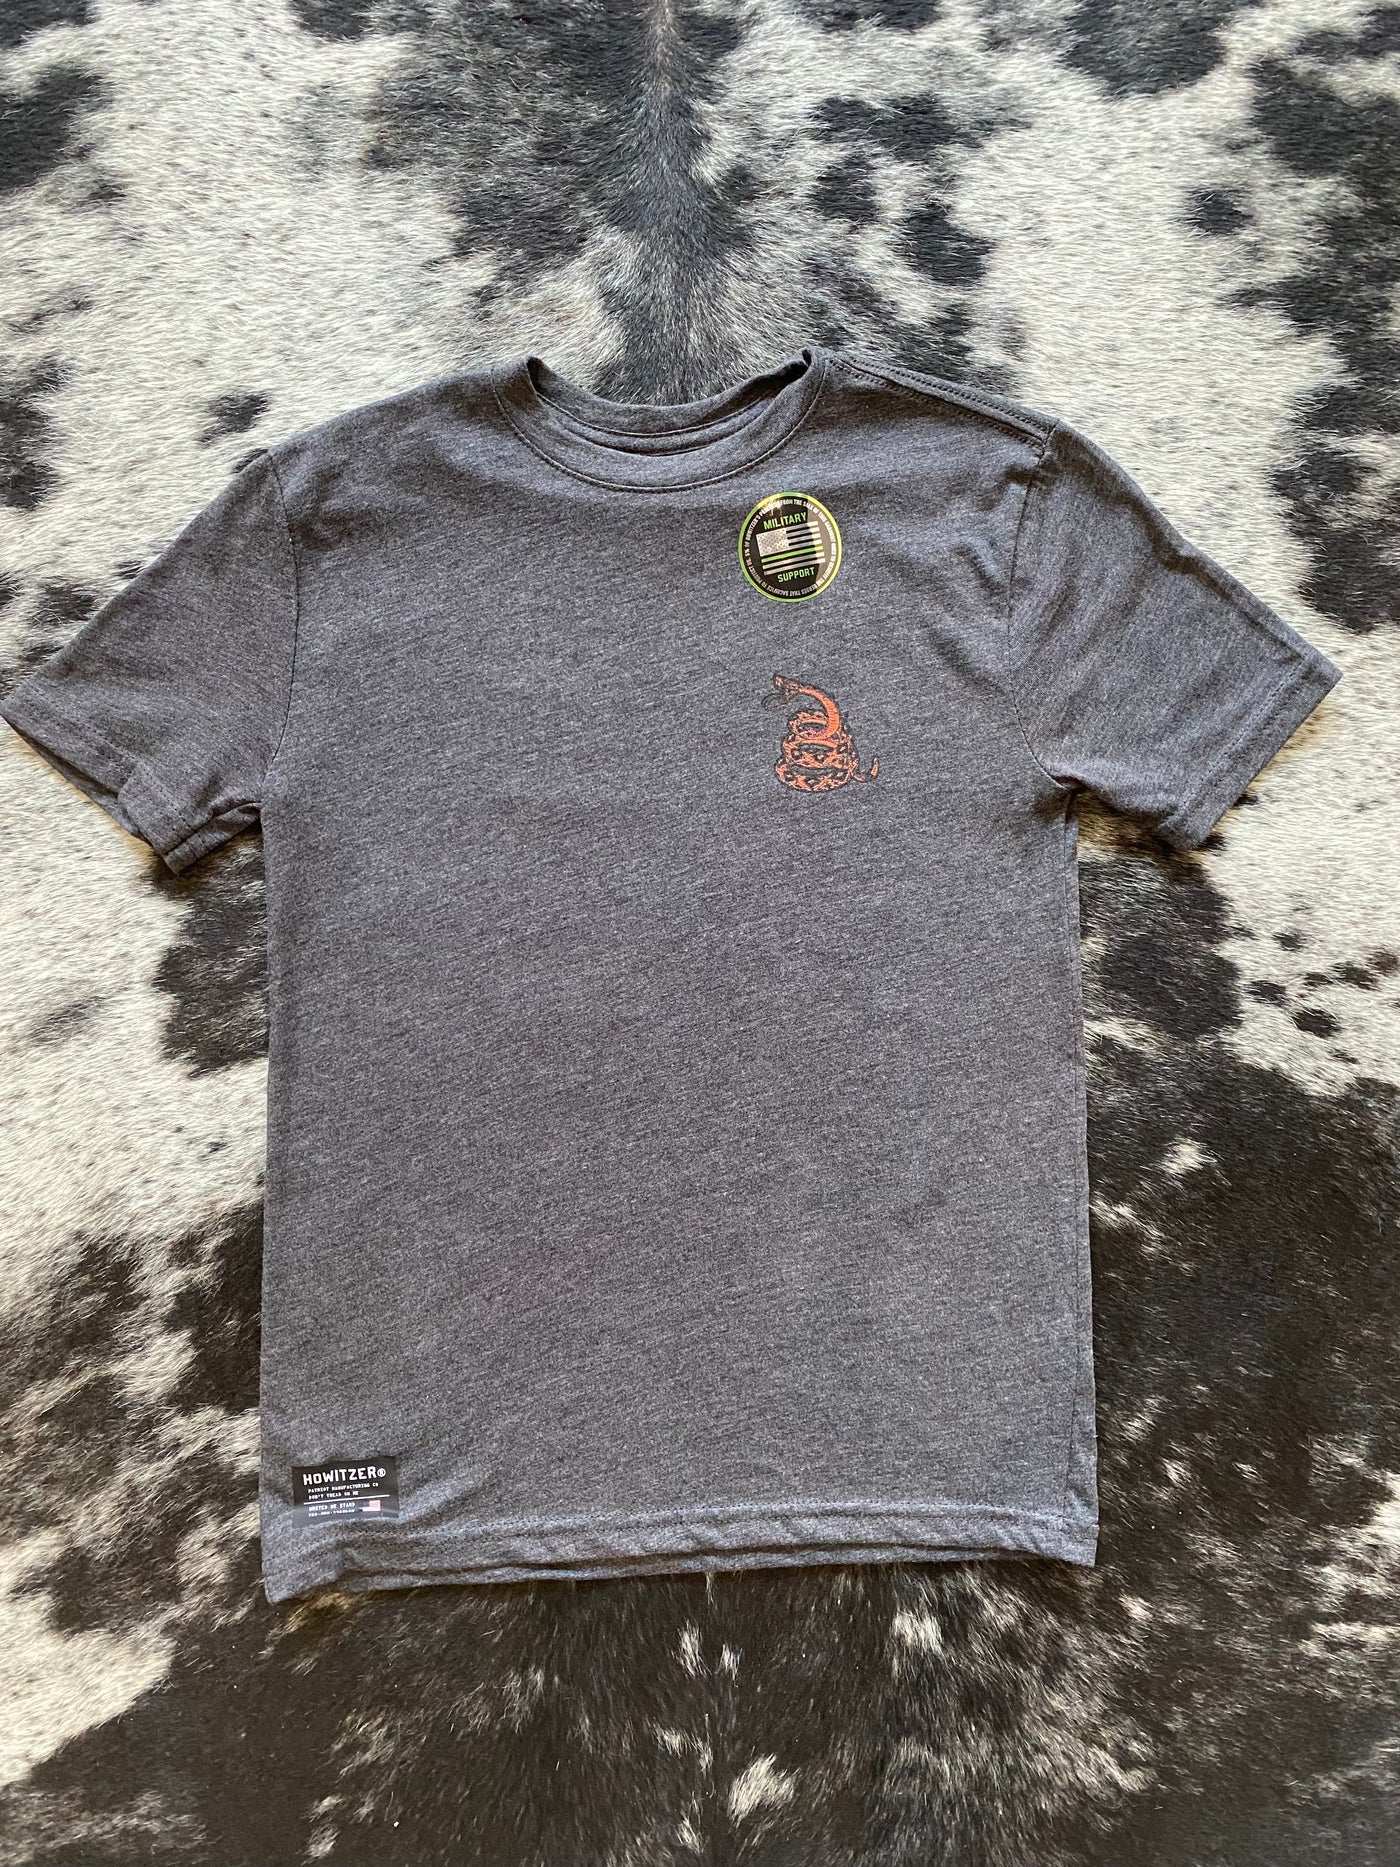 Howitzer No Tread Charcoal Gray Youth Graphic Tee